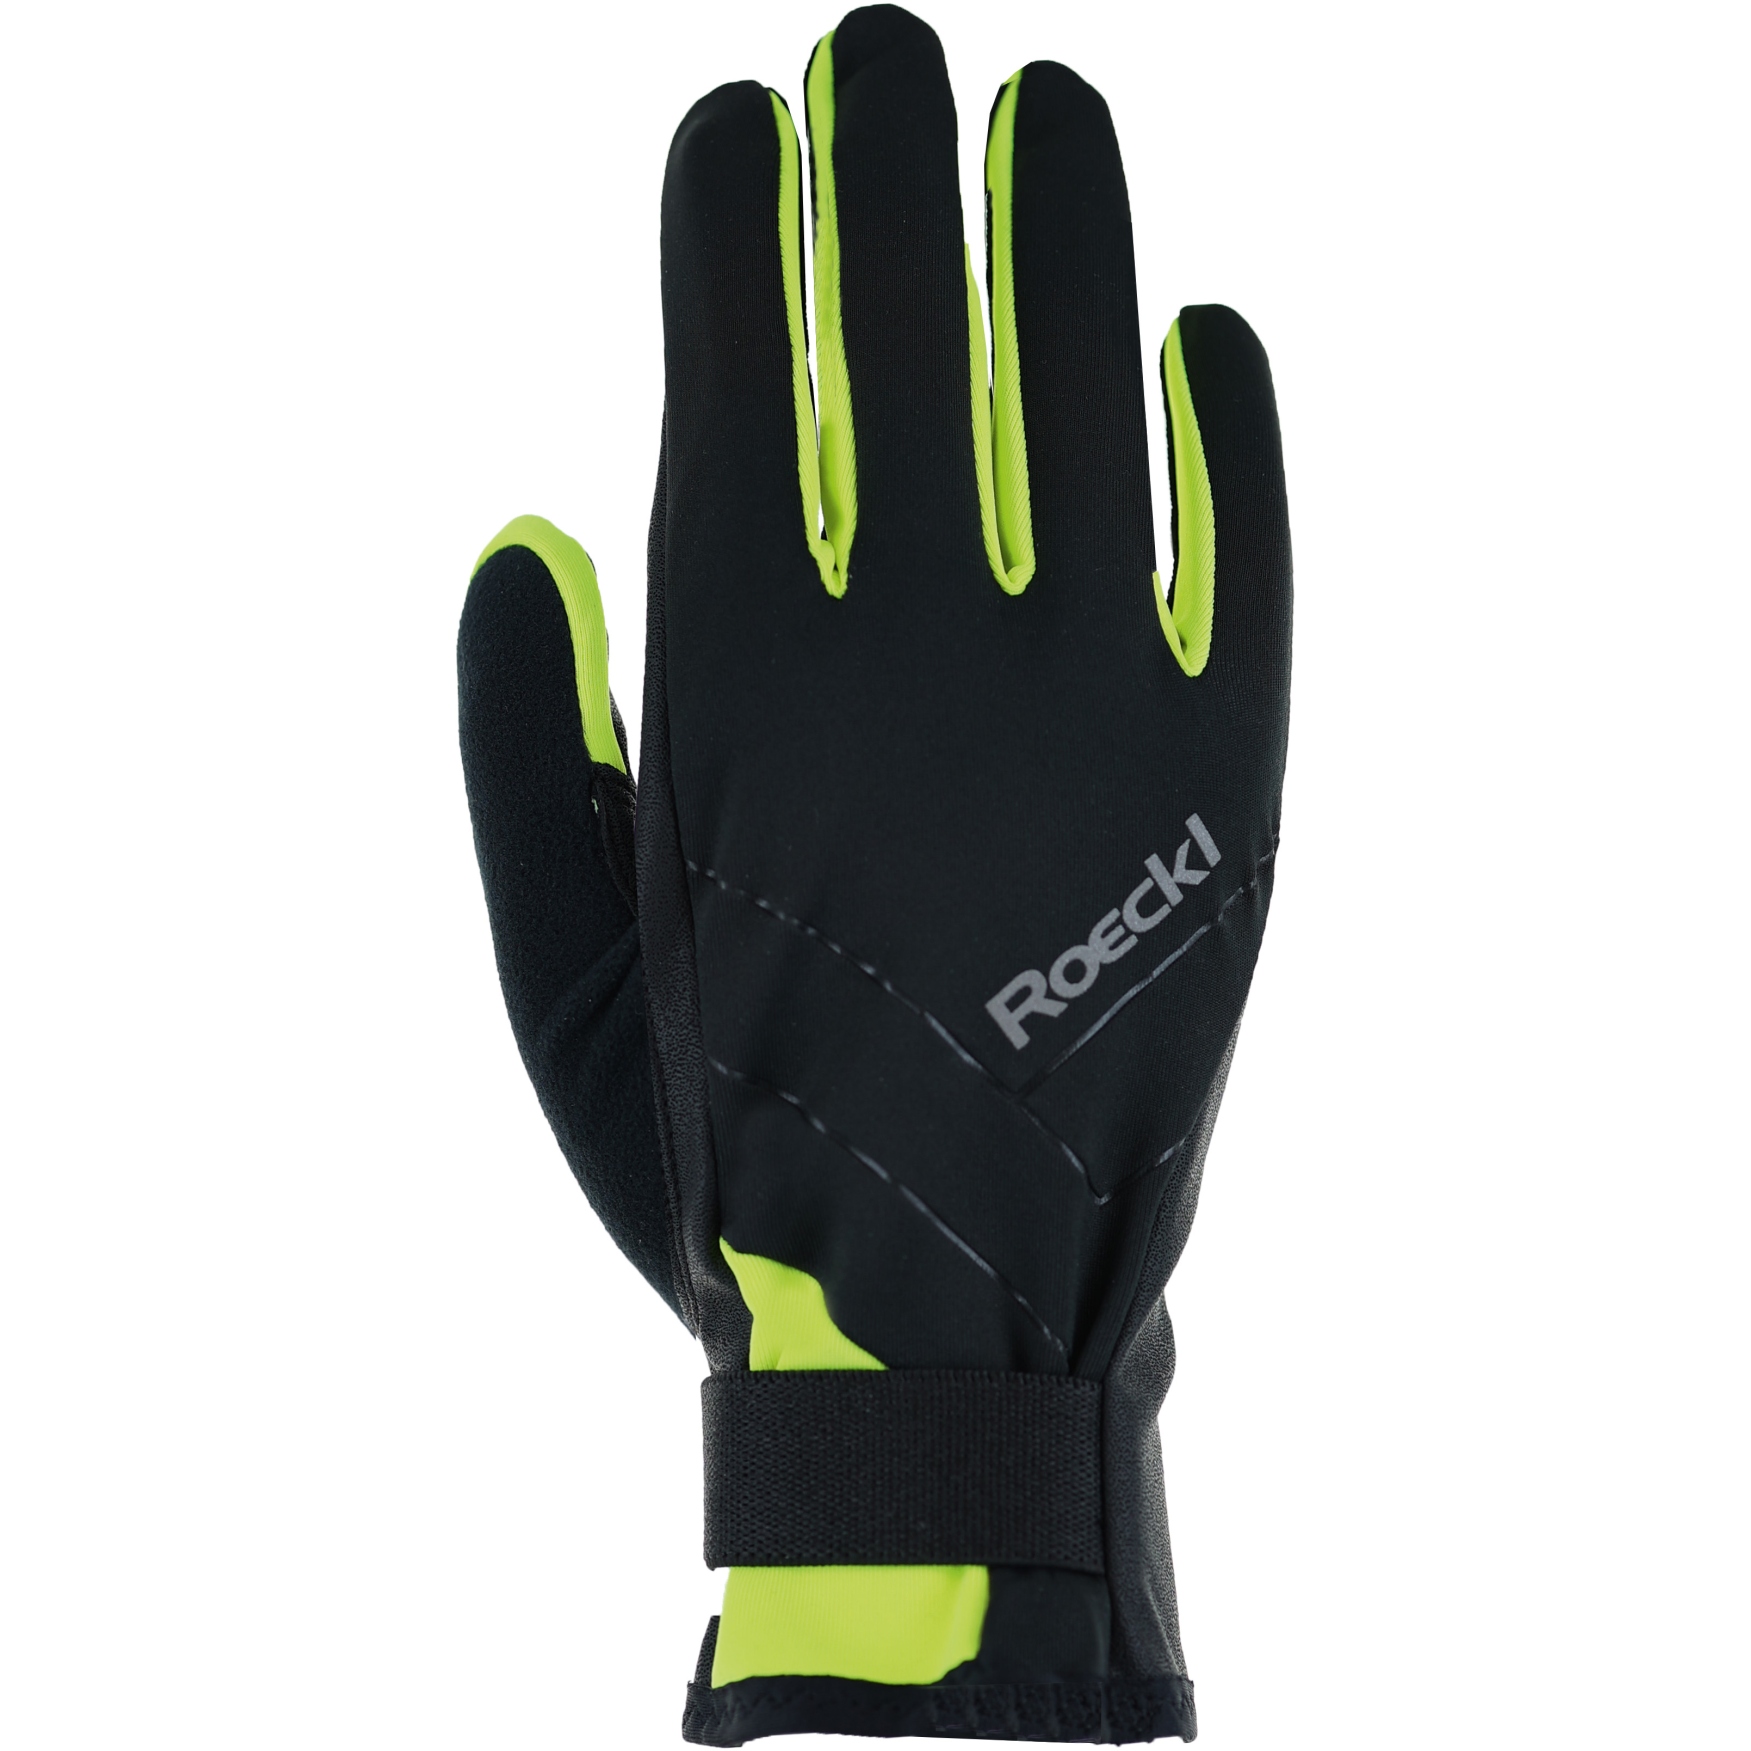 Picture of Roeckl Sports Lillby 2 Winter Gloves - black/fluo yellow 9210